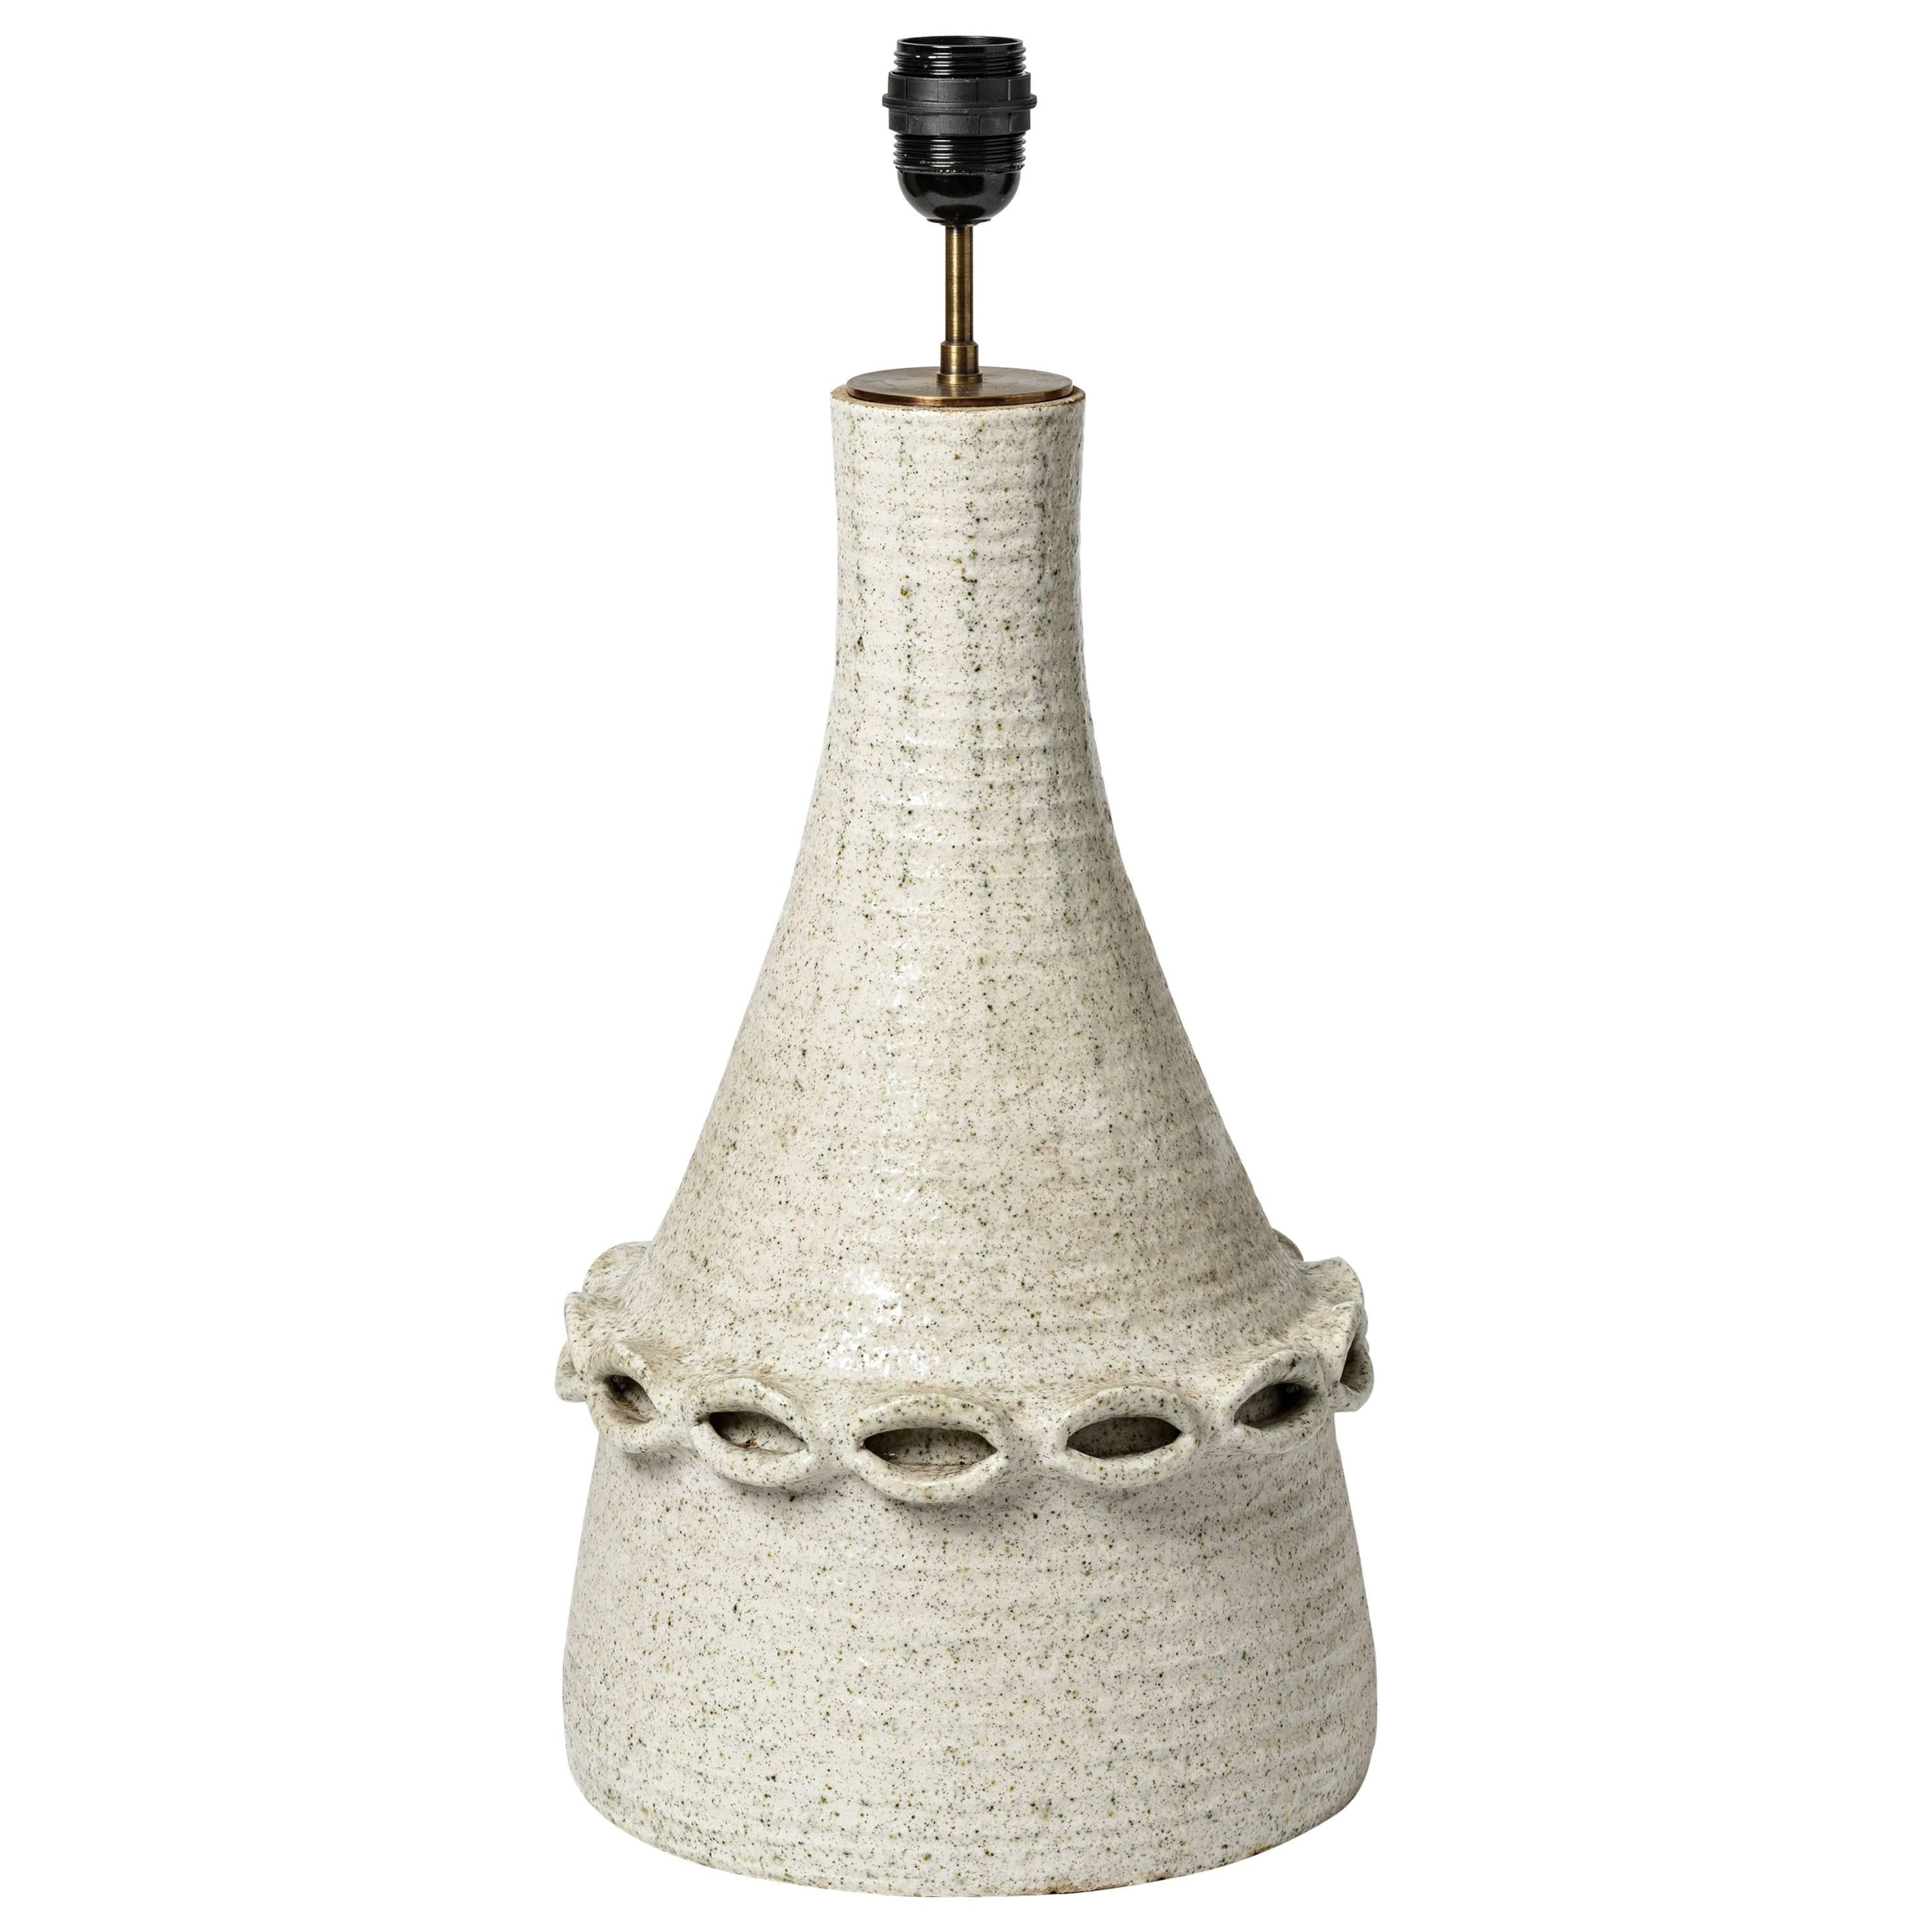 Ceramic Lamp by Accolay with White Glaze Decoration, circa 1970 For Sale